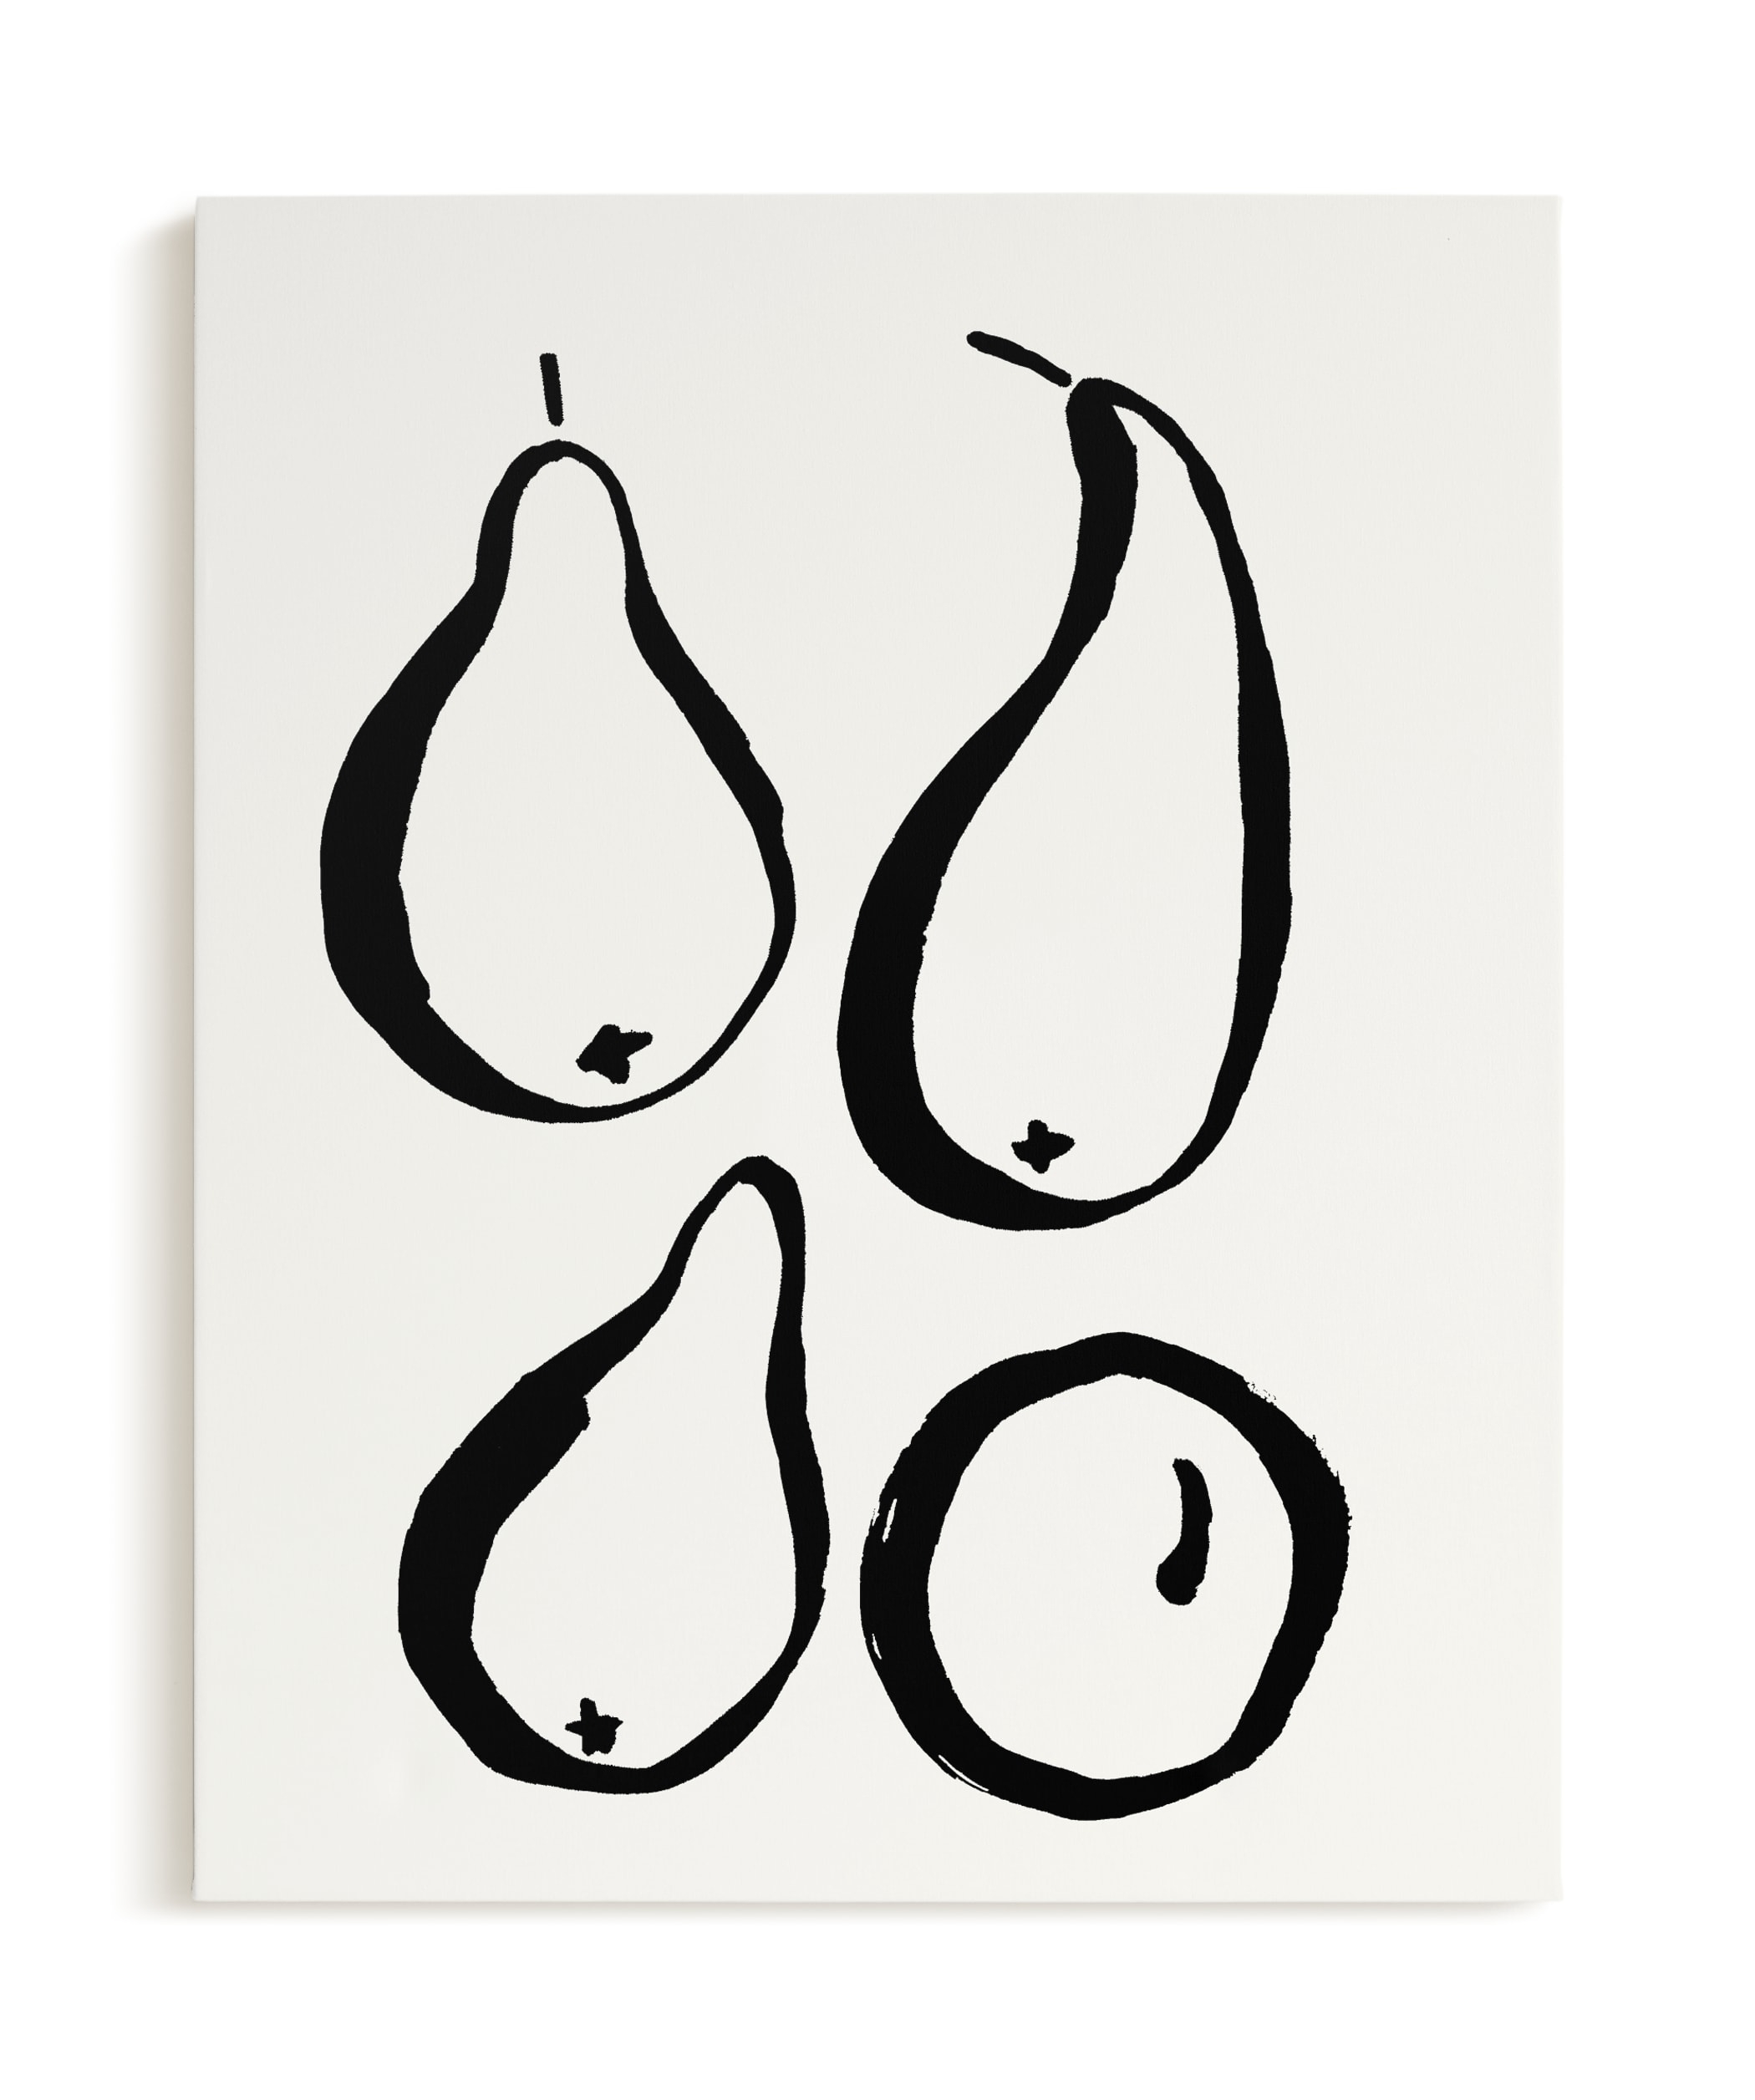 Still-life with four pears - 24x30 - Canvas - Image 0